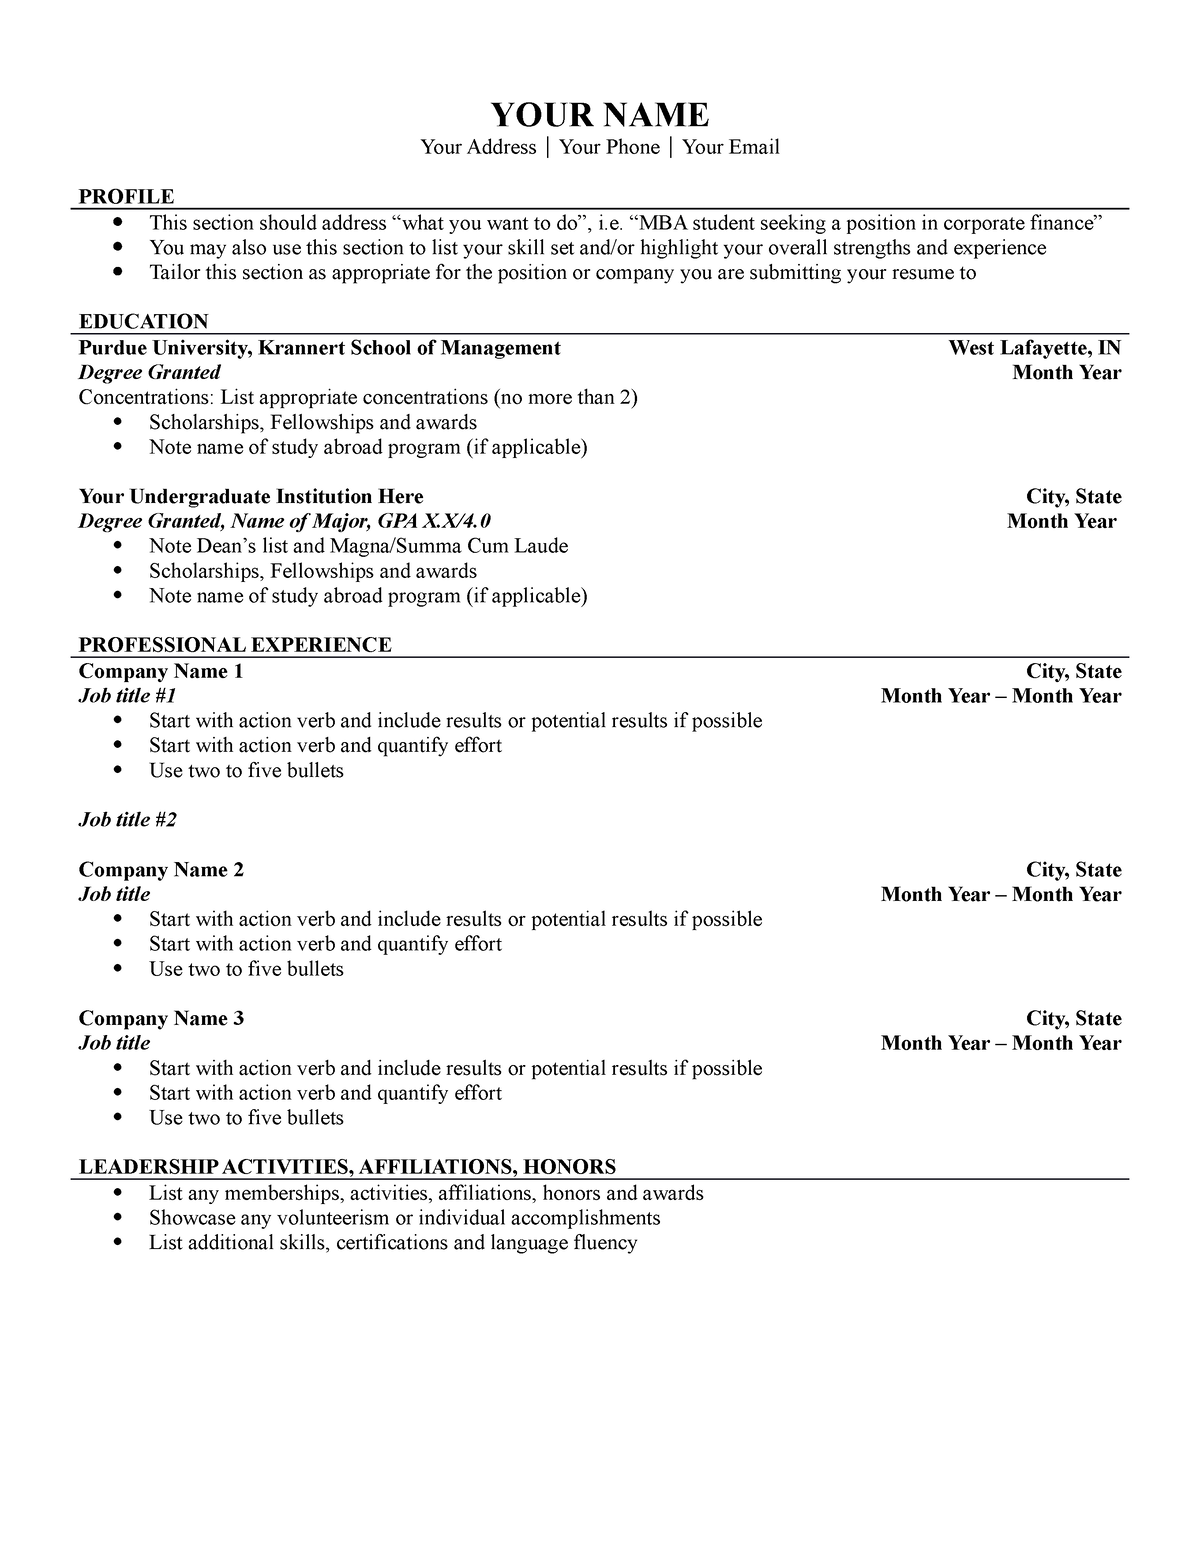 Resume-Template - Resume - YOUR NAME Your Address Your Phone Your Email ...